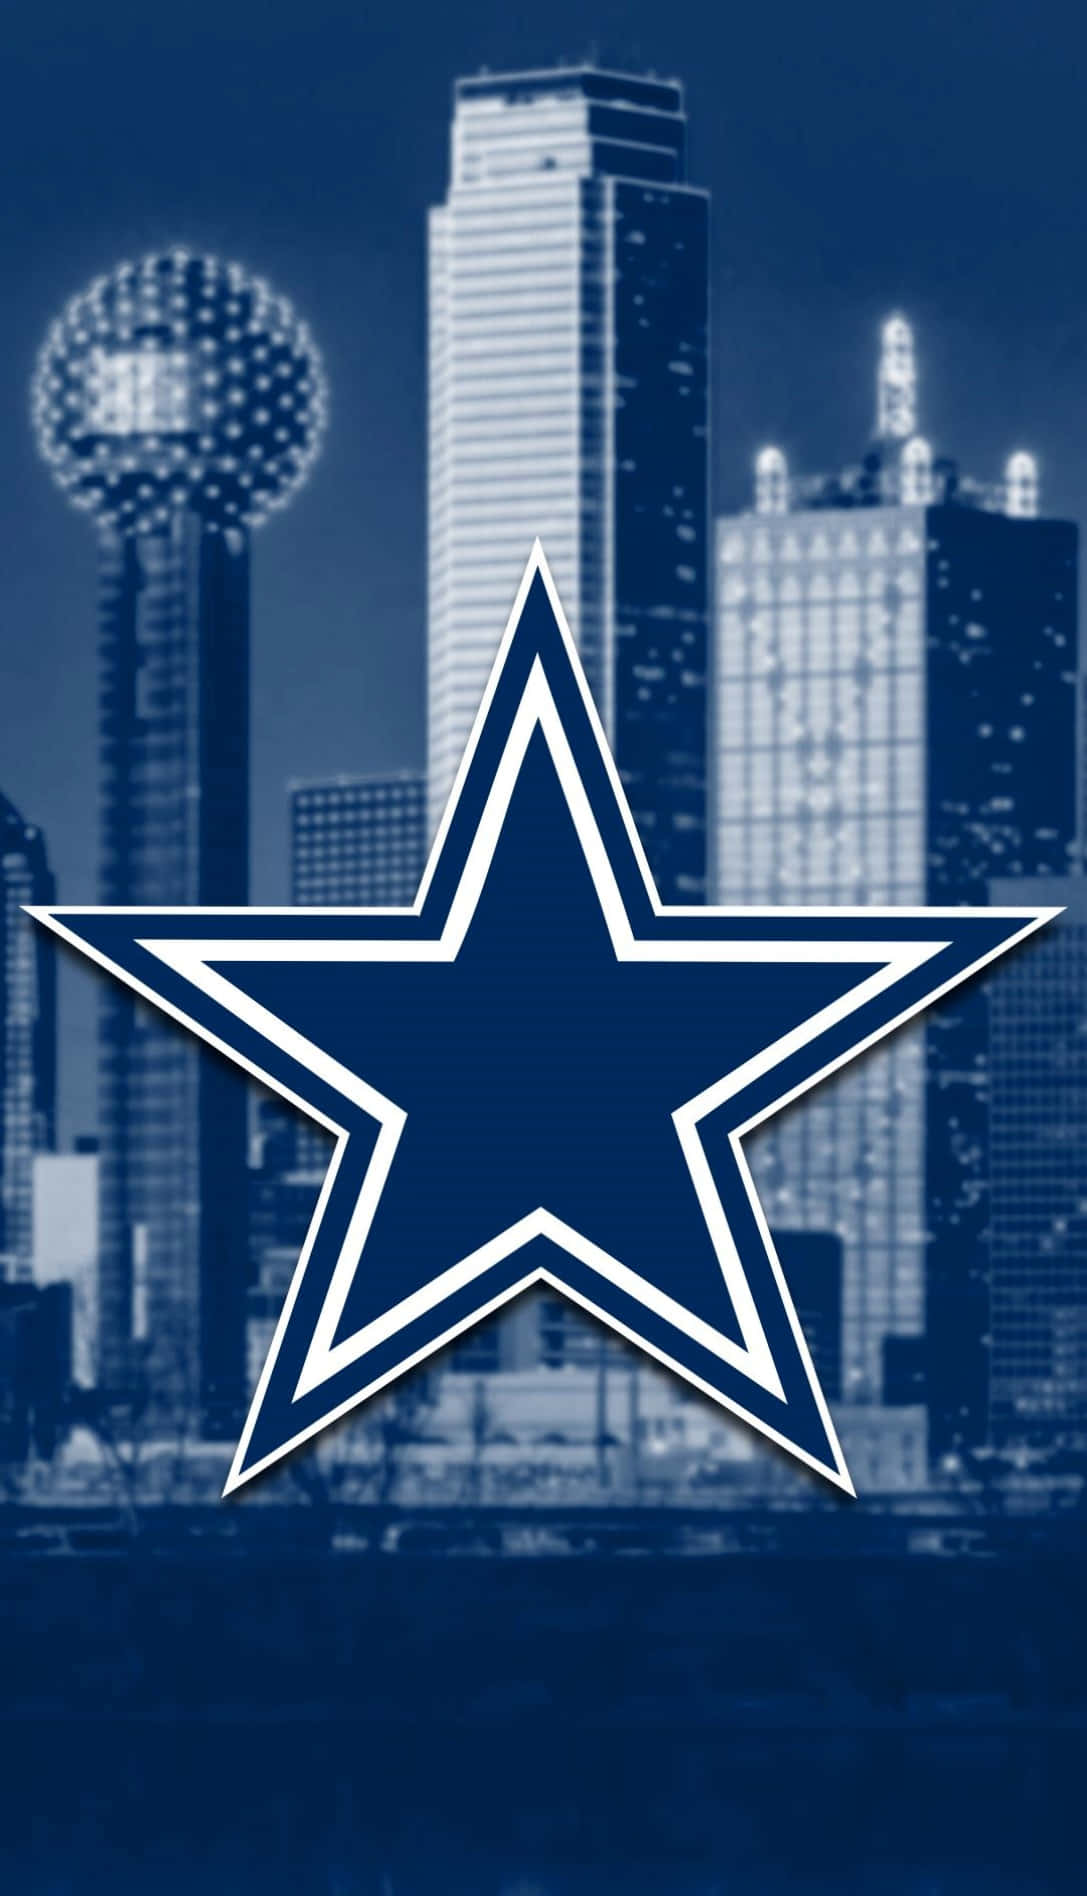 Be a proud fan of the Dallas Cowboys with their official iPhone! Wallpaper